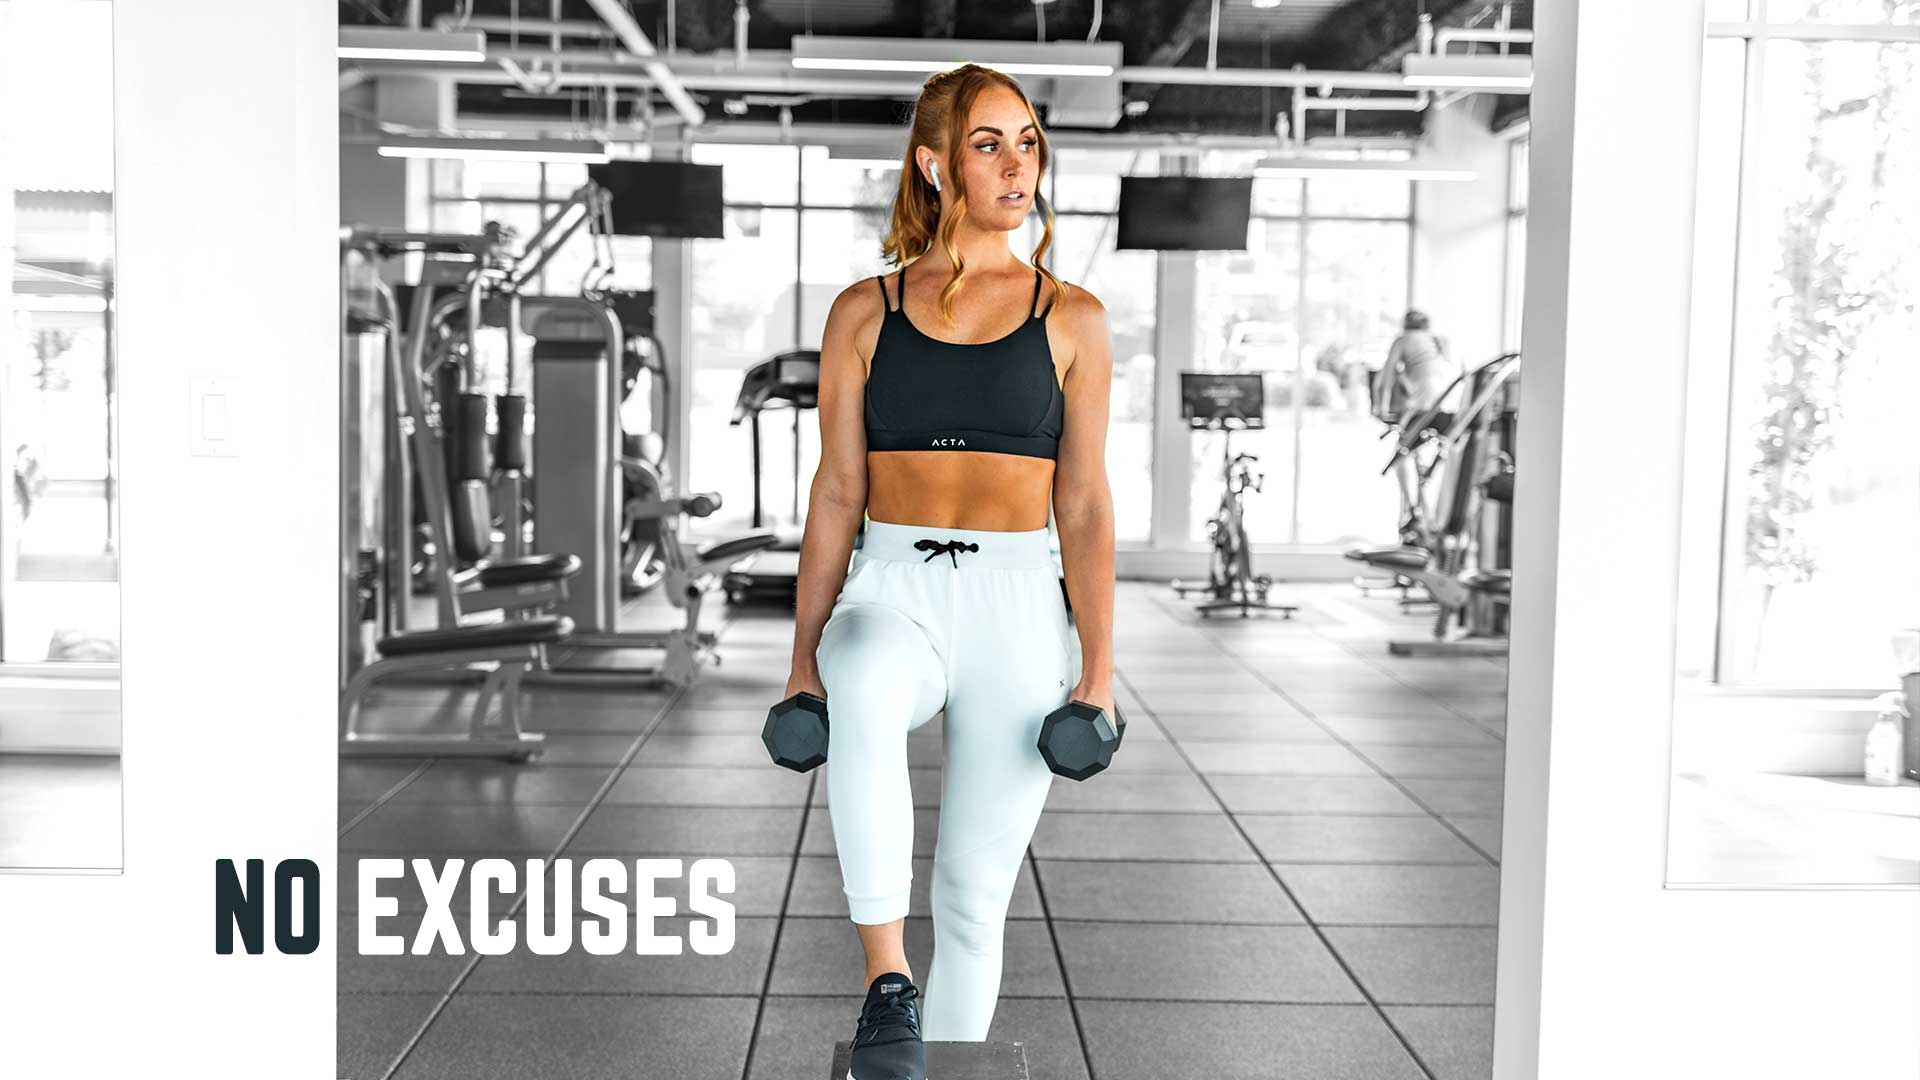 No Excuses Quote Motivational - Graphic Frame - HD Wallpaper 